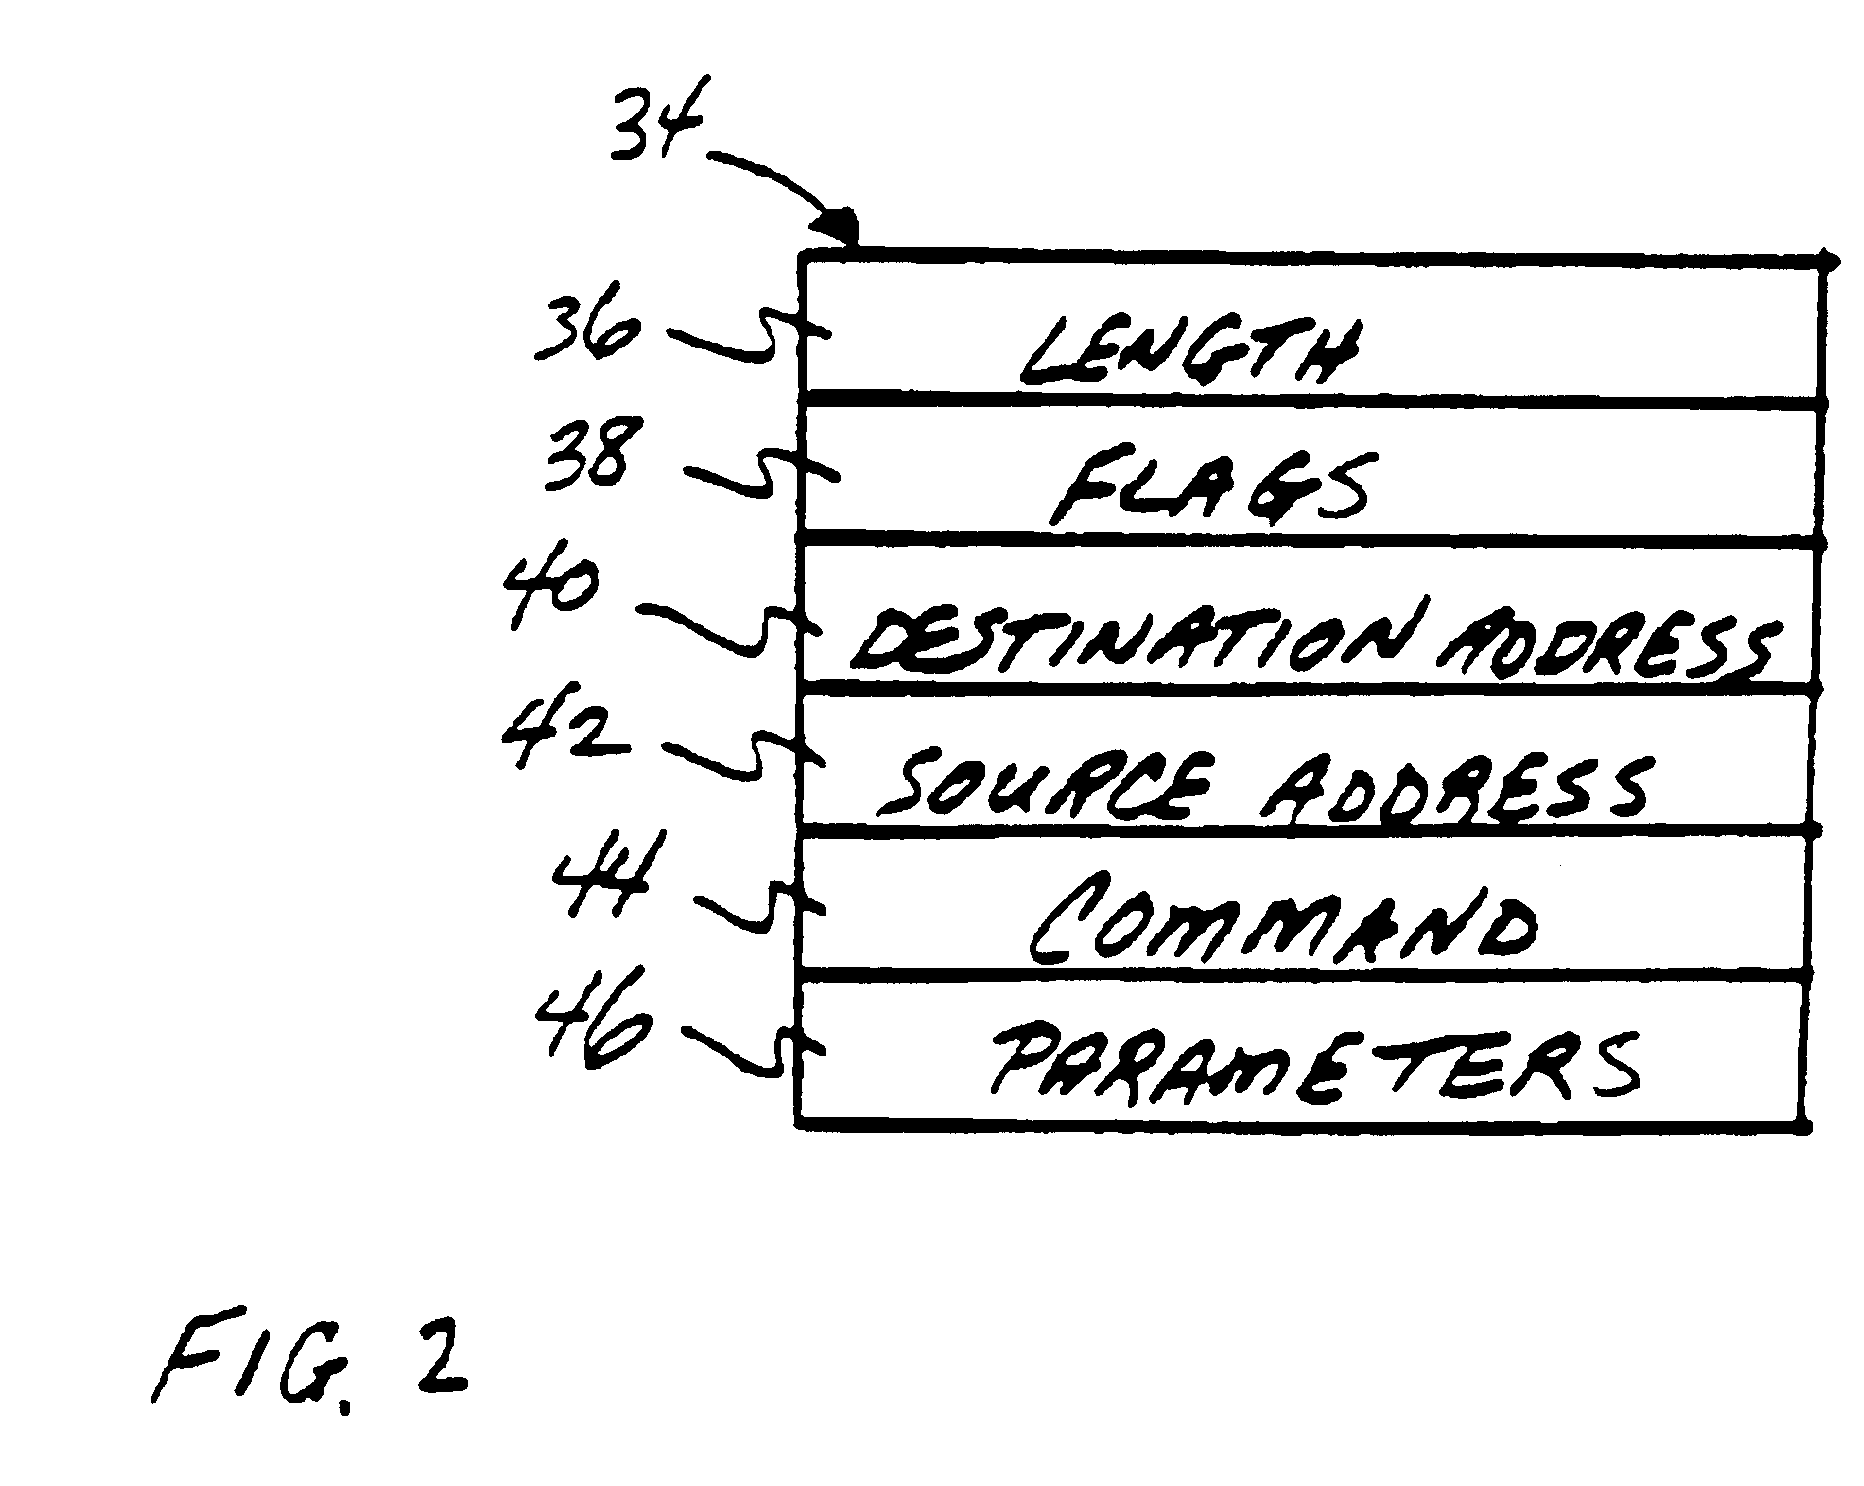 Computer telephony system using multiple hardware platforms to provide telephony services